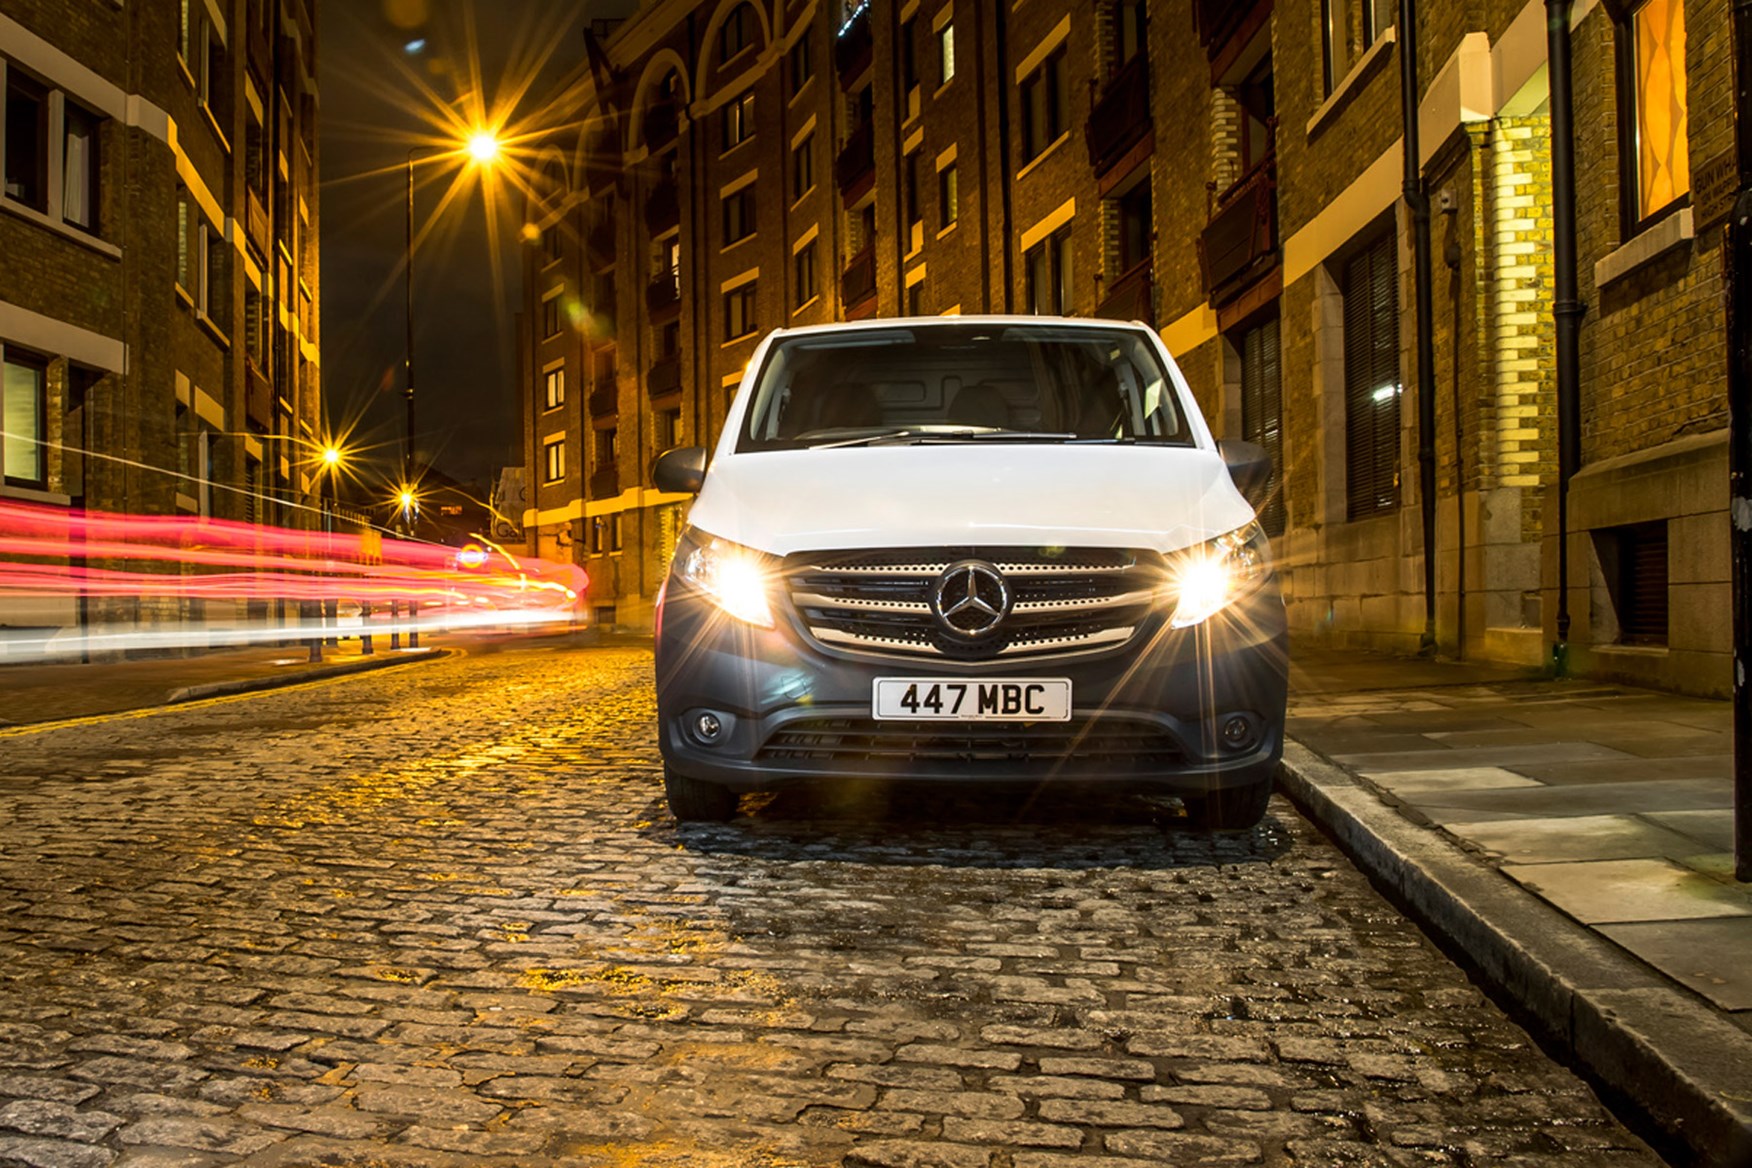 Mercedes-Benz Vito full review on Parkers Vans - front